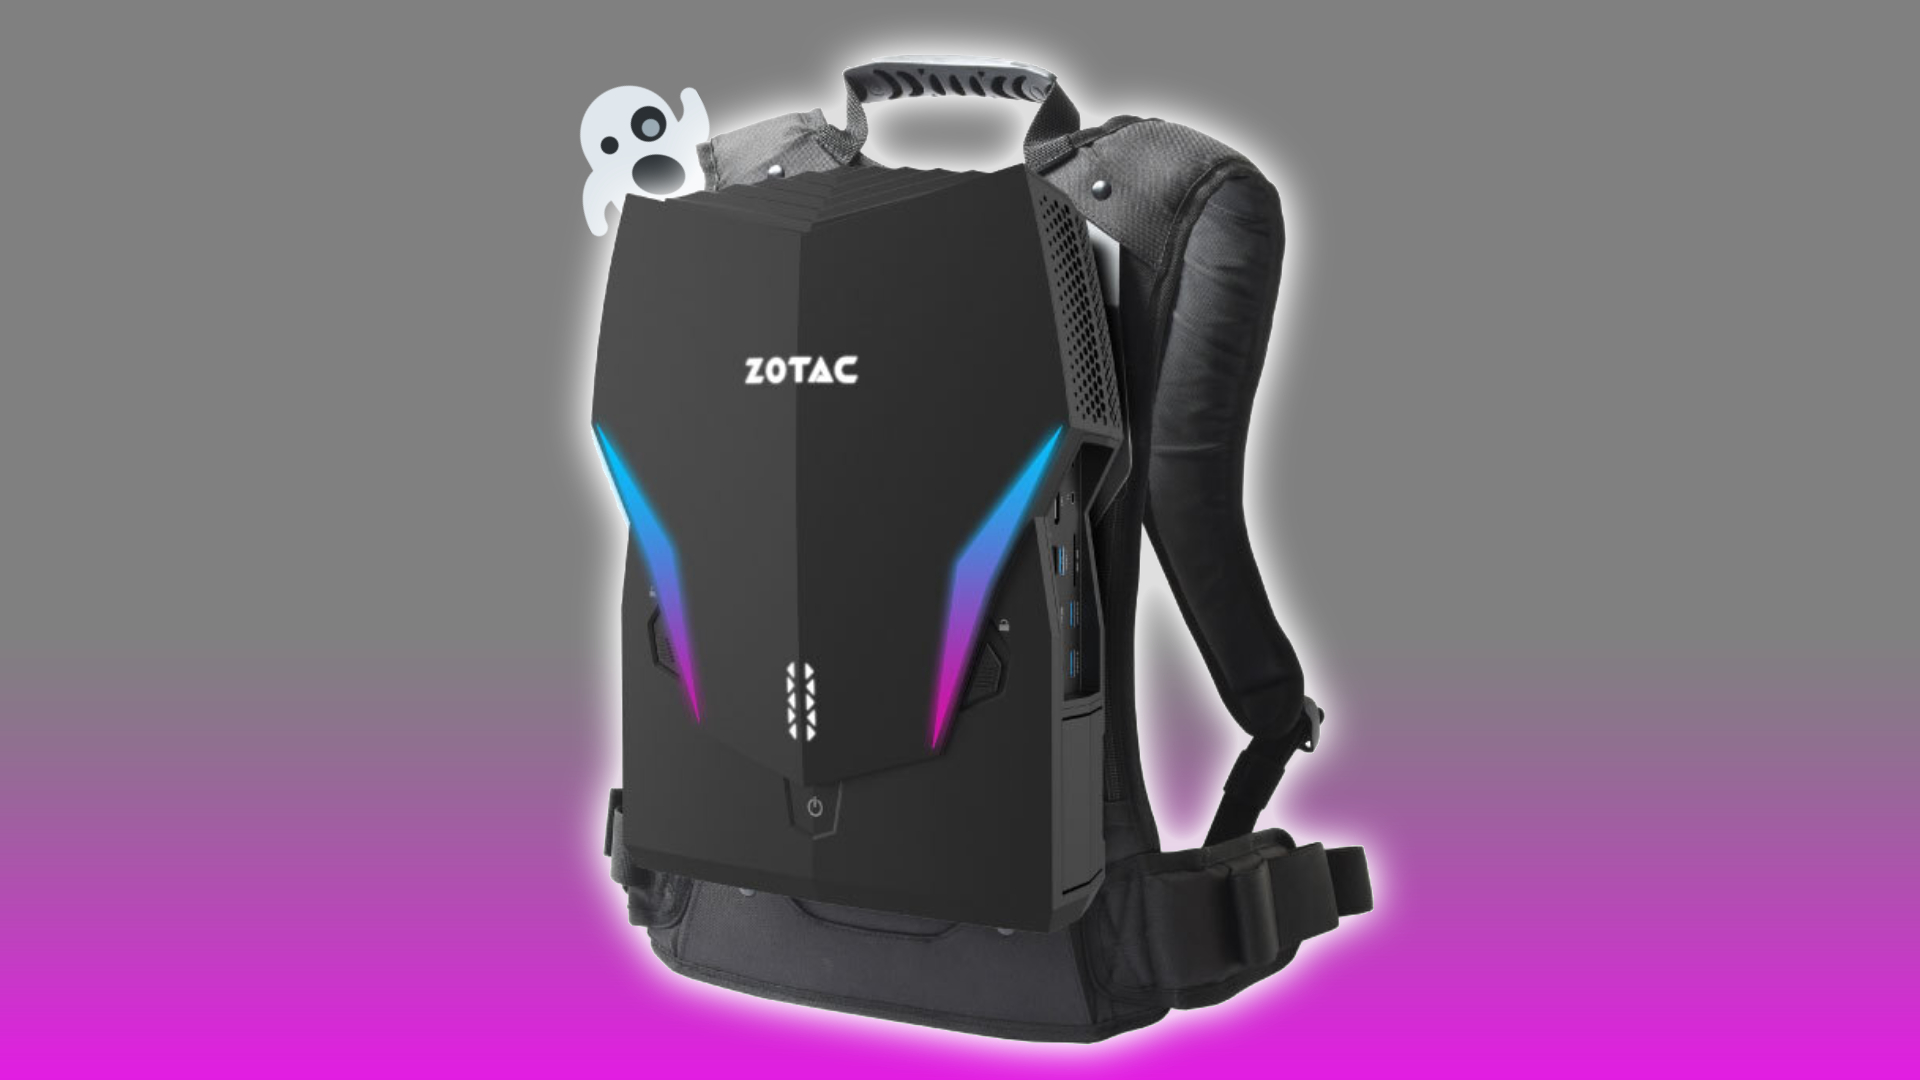 Zotac PC goes Ghostbusters for that standalone VR headset experience ...